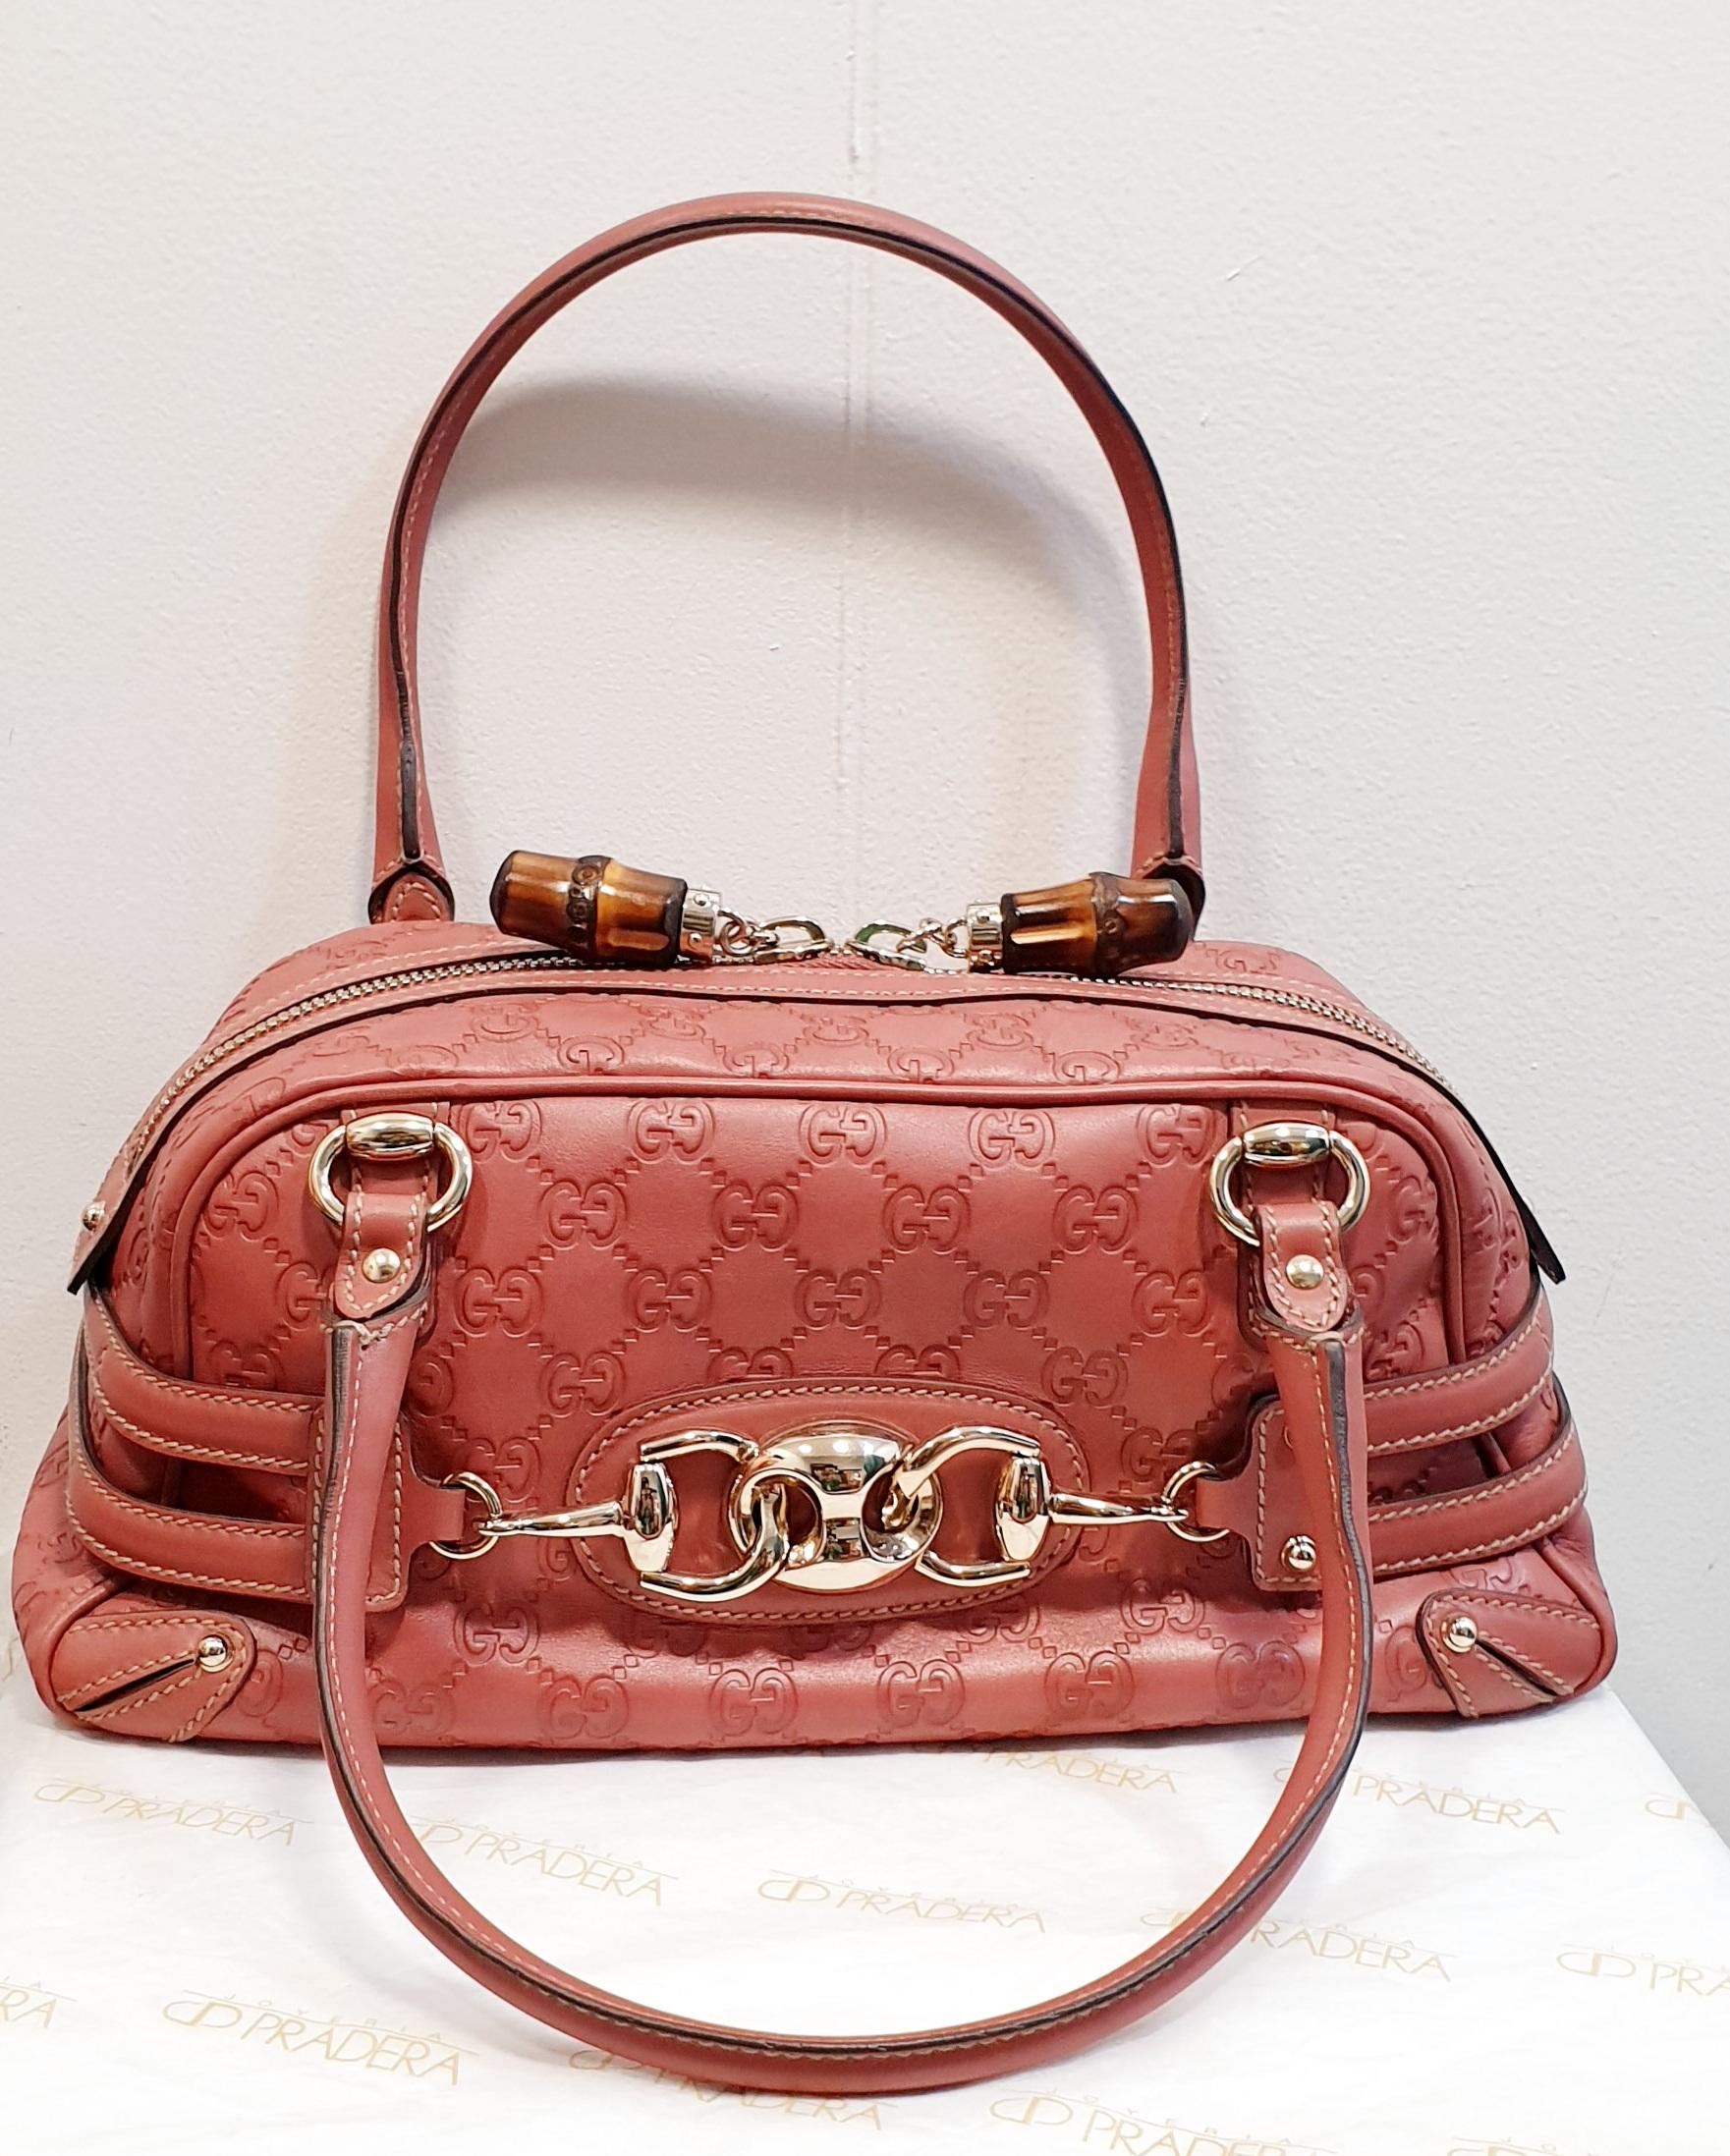 Gucci Pink Leather Bag With Bamboo Closure and big golden horsebit  logo
Rest of boutique stock never used

Double round leather strap: 6.5